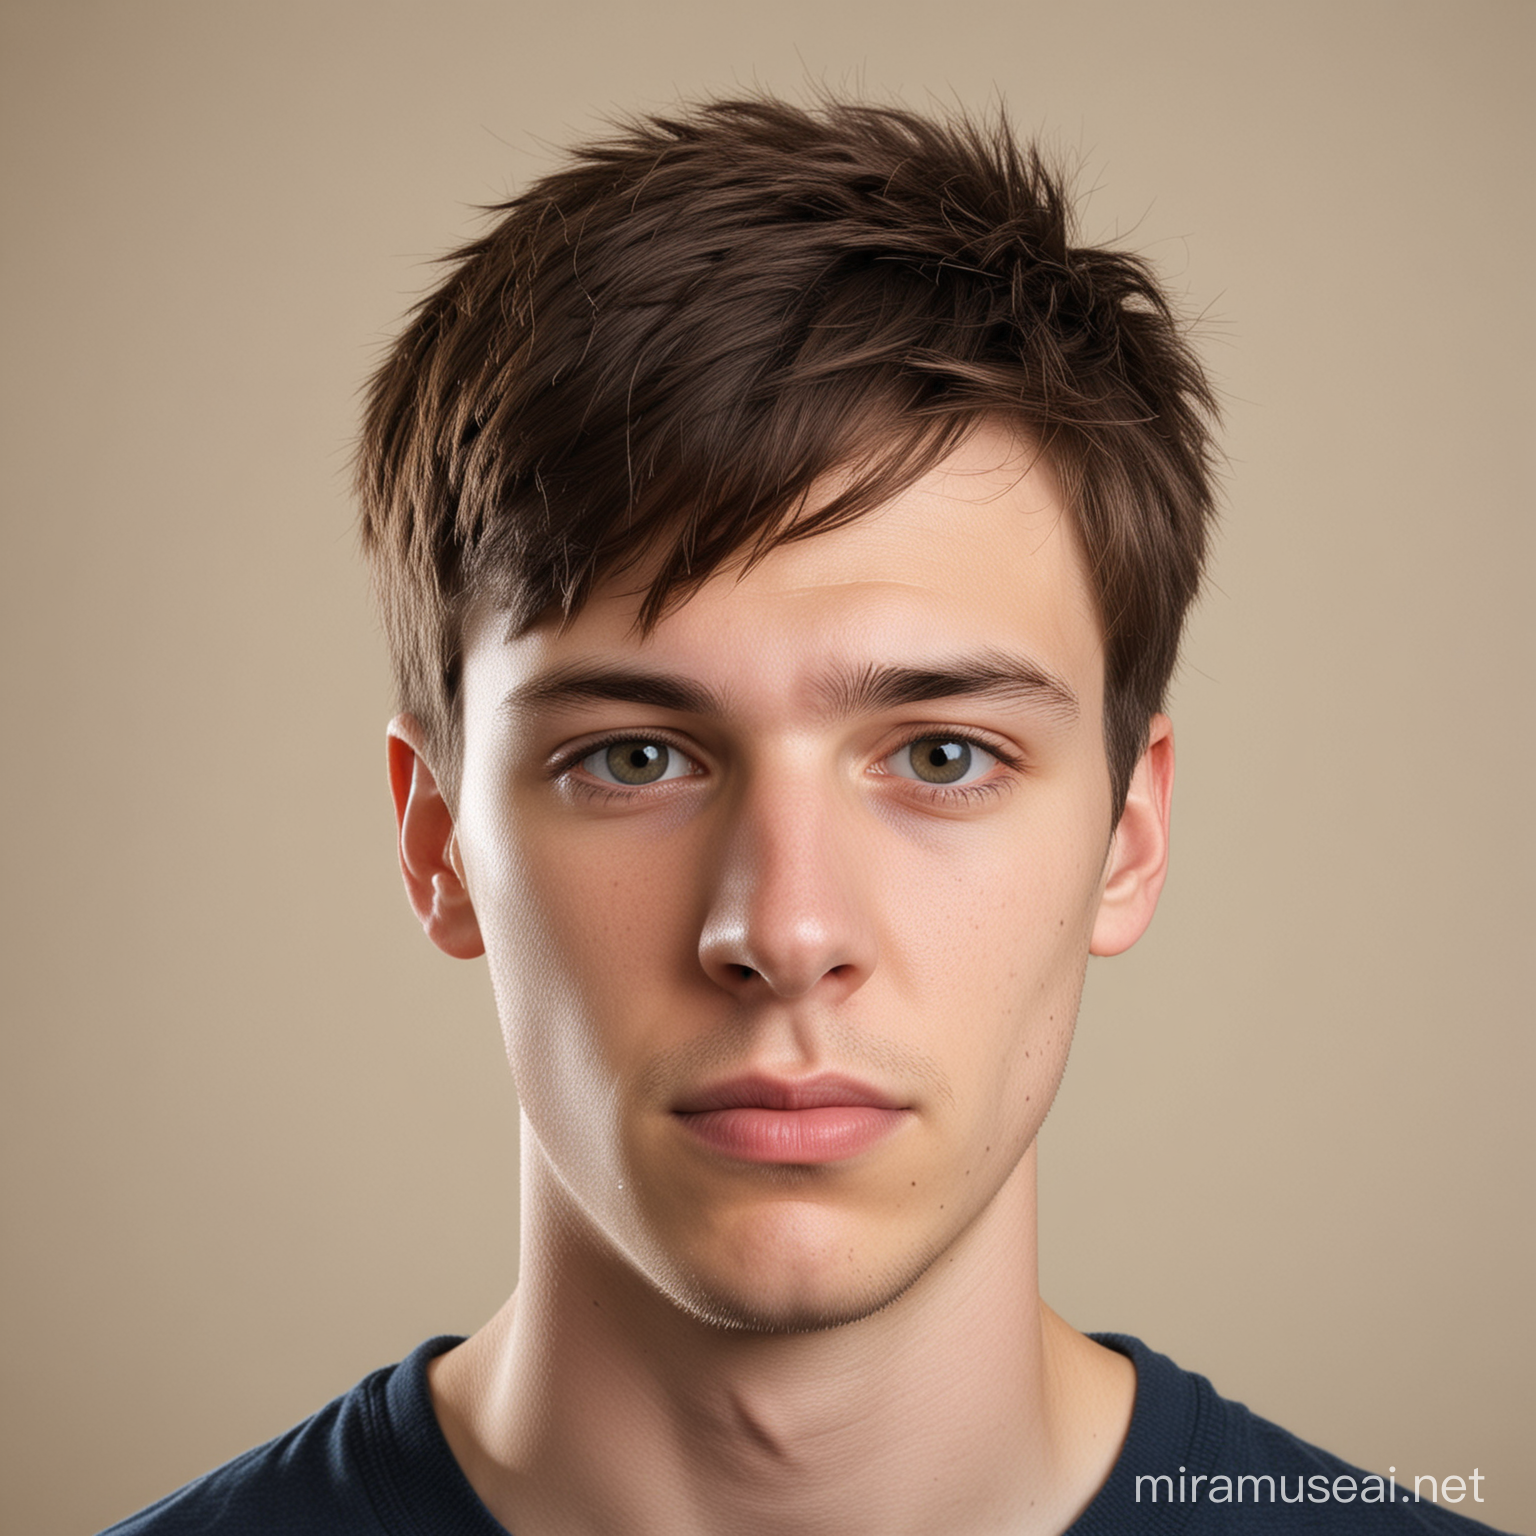 a profile photo of a young man suffering from asperger's syndrome, where you can see her face from the front
